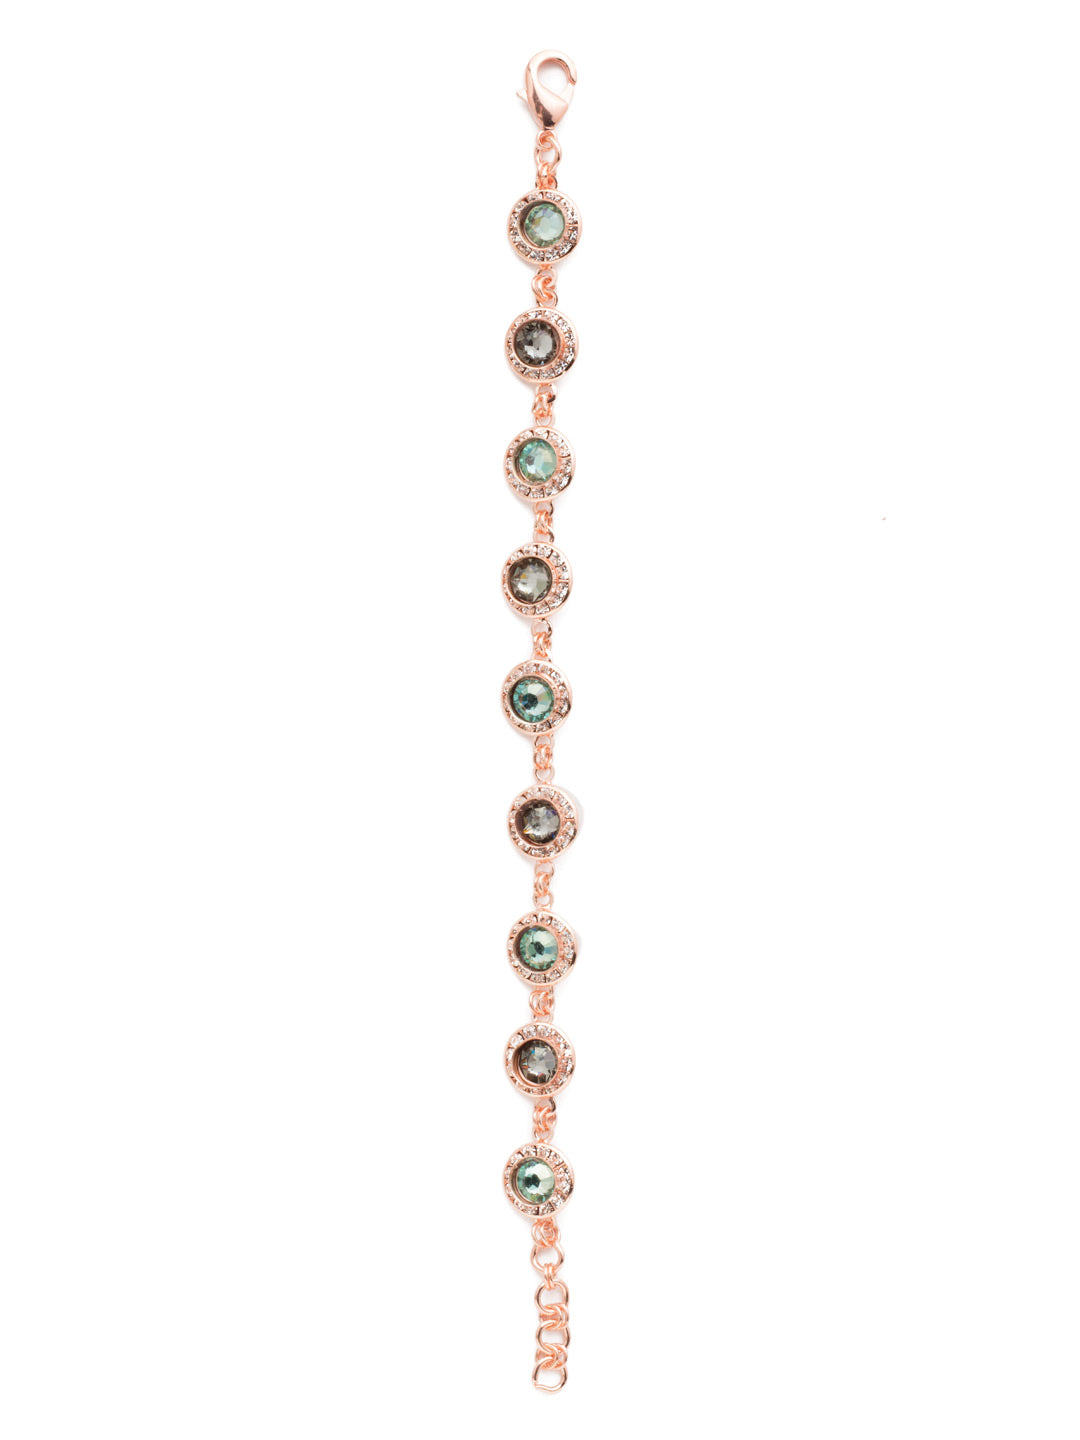 Wilfred Tennis Bracelet - BET15RGCAZ - Ooze glamour when you wrap your wrist in the Wilfred Tennis Bracelet. Its evenly spaced sparkling crystals (rimmed in even more sparkle!) shine bright. From Sorrelli's Crystal Azure collection in our Rose Gold-tone finish.